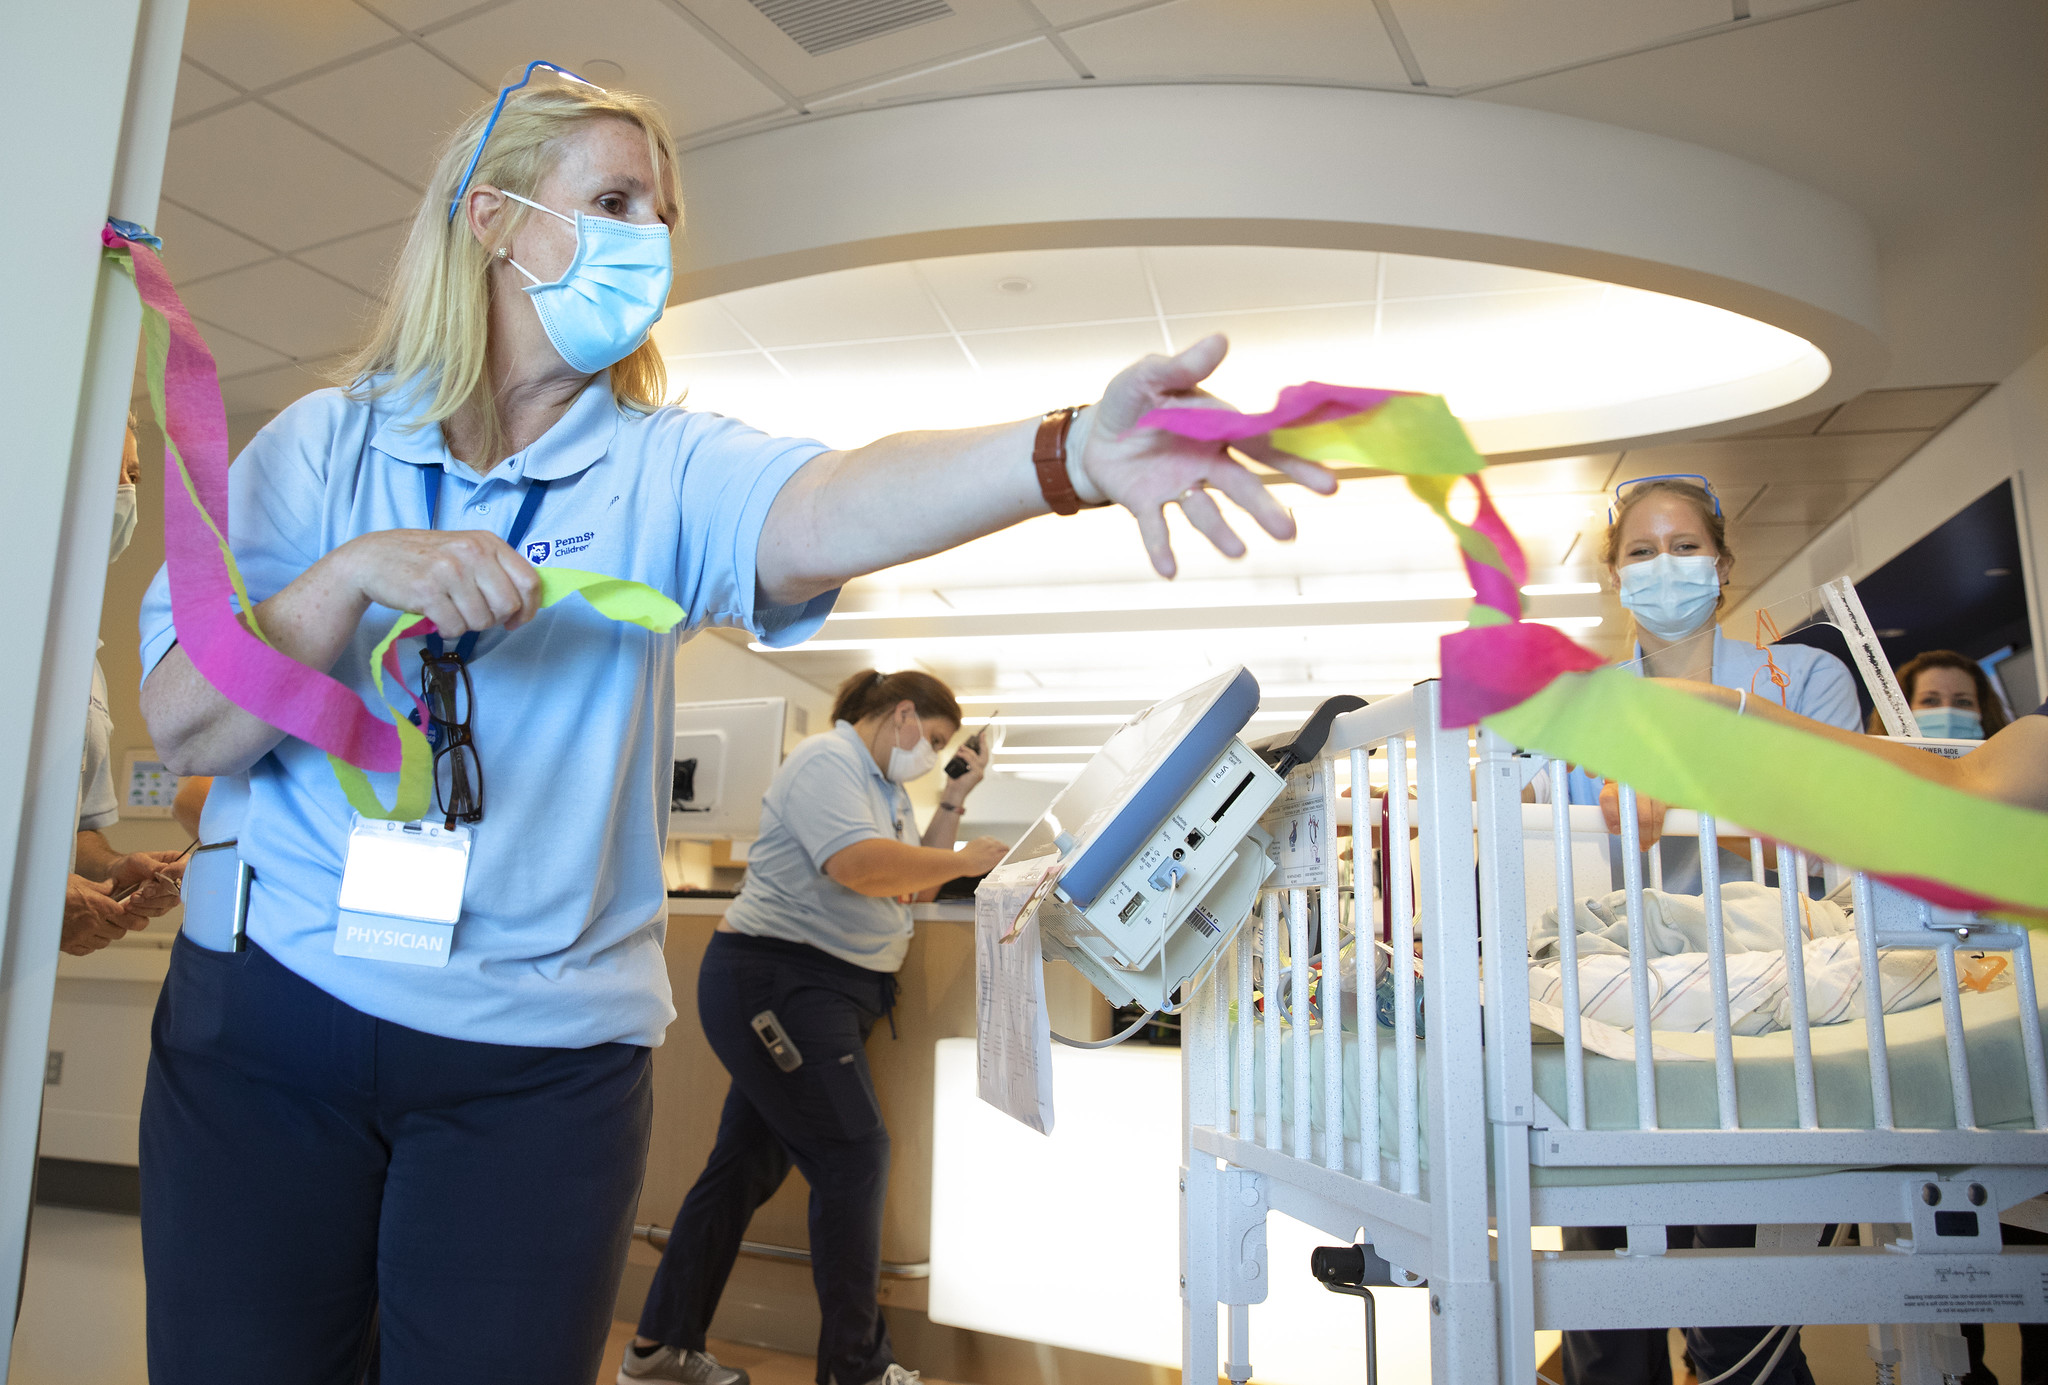 Dr. Sarah Iriana extends her arm holding a handful of ribbon next to a crib. Equipment is draped from the side of the crib. Behind her, three women in surgical masks look on or focus on other work.